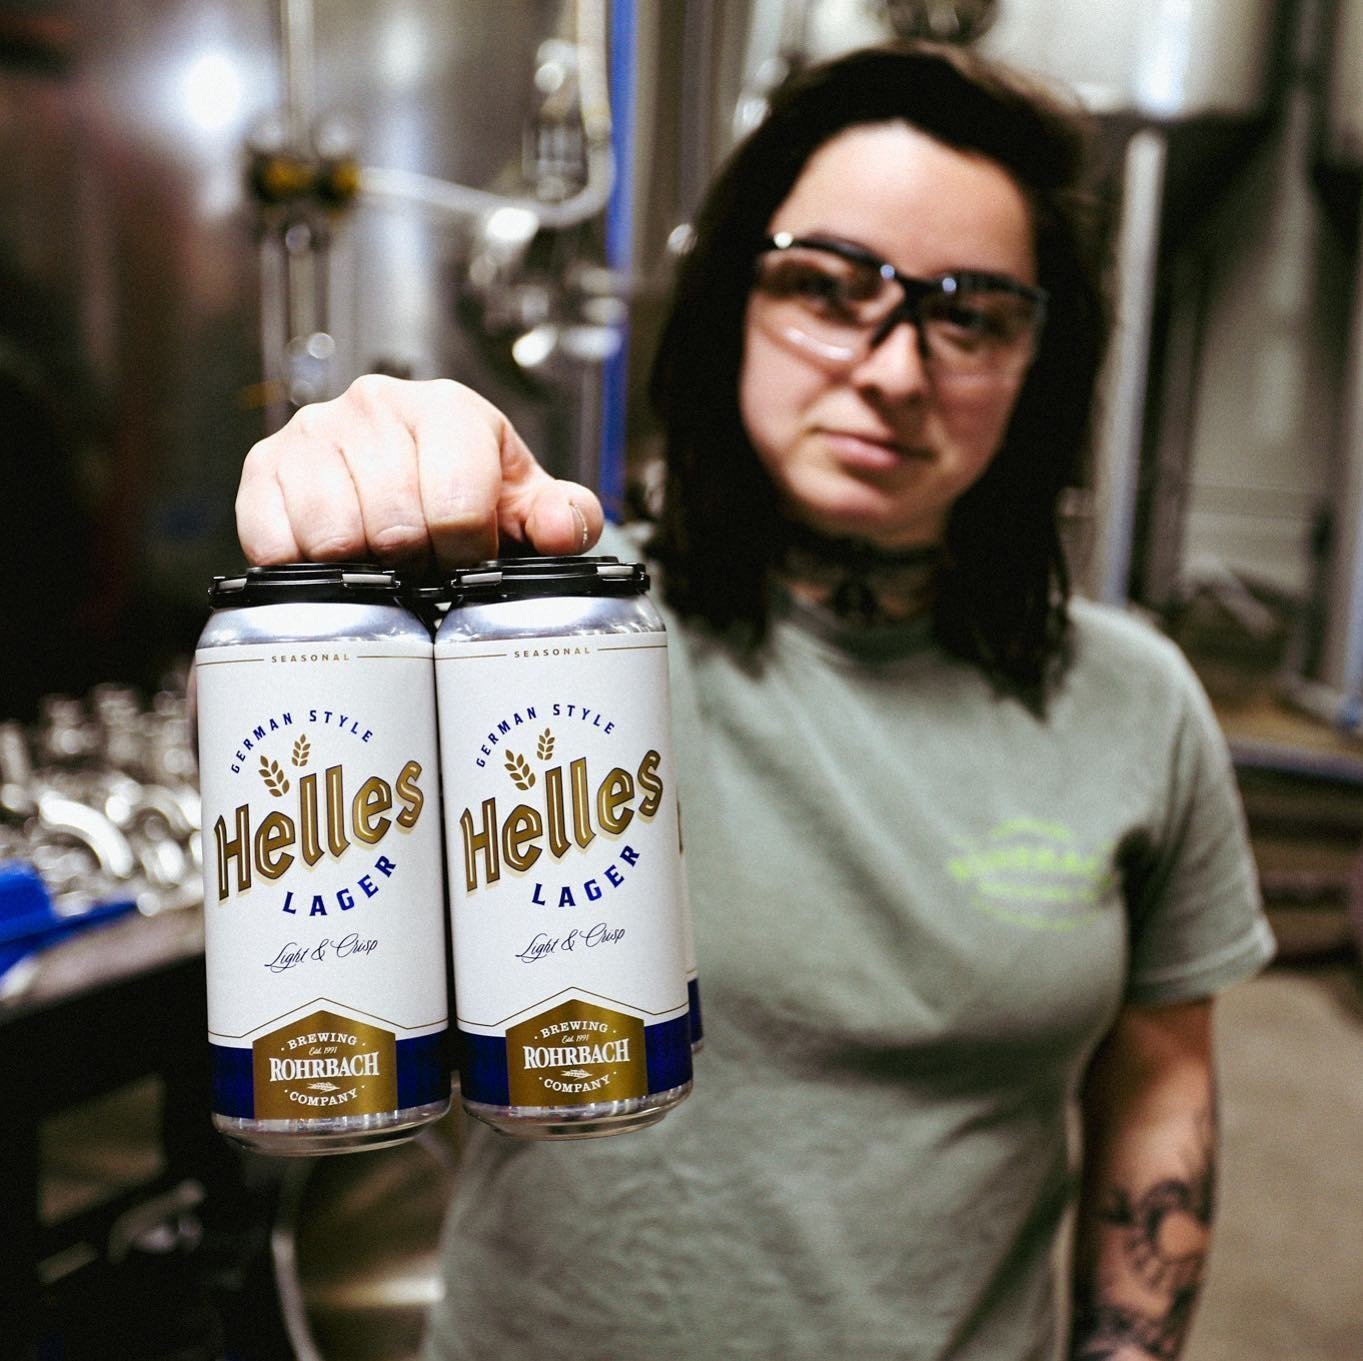 Helles Lager is a crisp and refreshing German-style lager to beat the Upstate NY heat 👊 It was brewed with Pilsen and Vienna Malts and hopped with German Hallertau Mittelfruh hops for a slightly floral aroma. ⁠
⁠
Stock up for Memorial Day weekend!⁠
